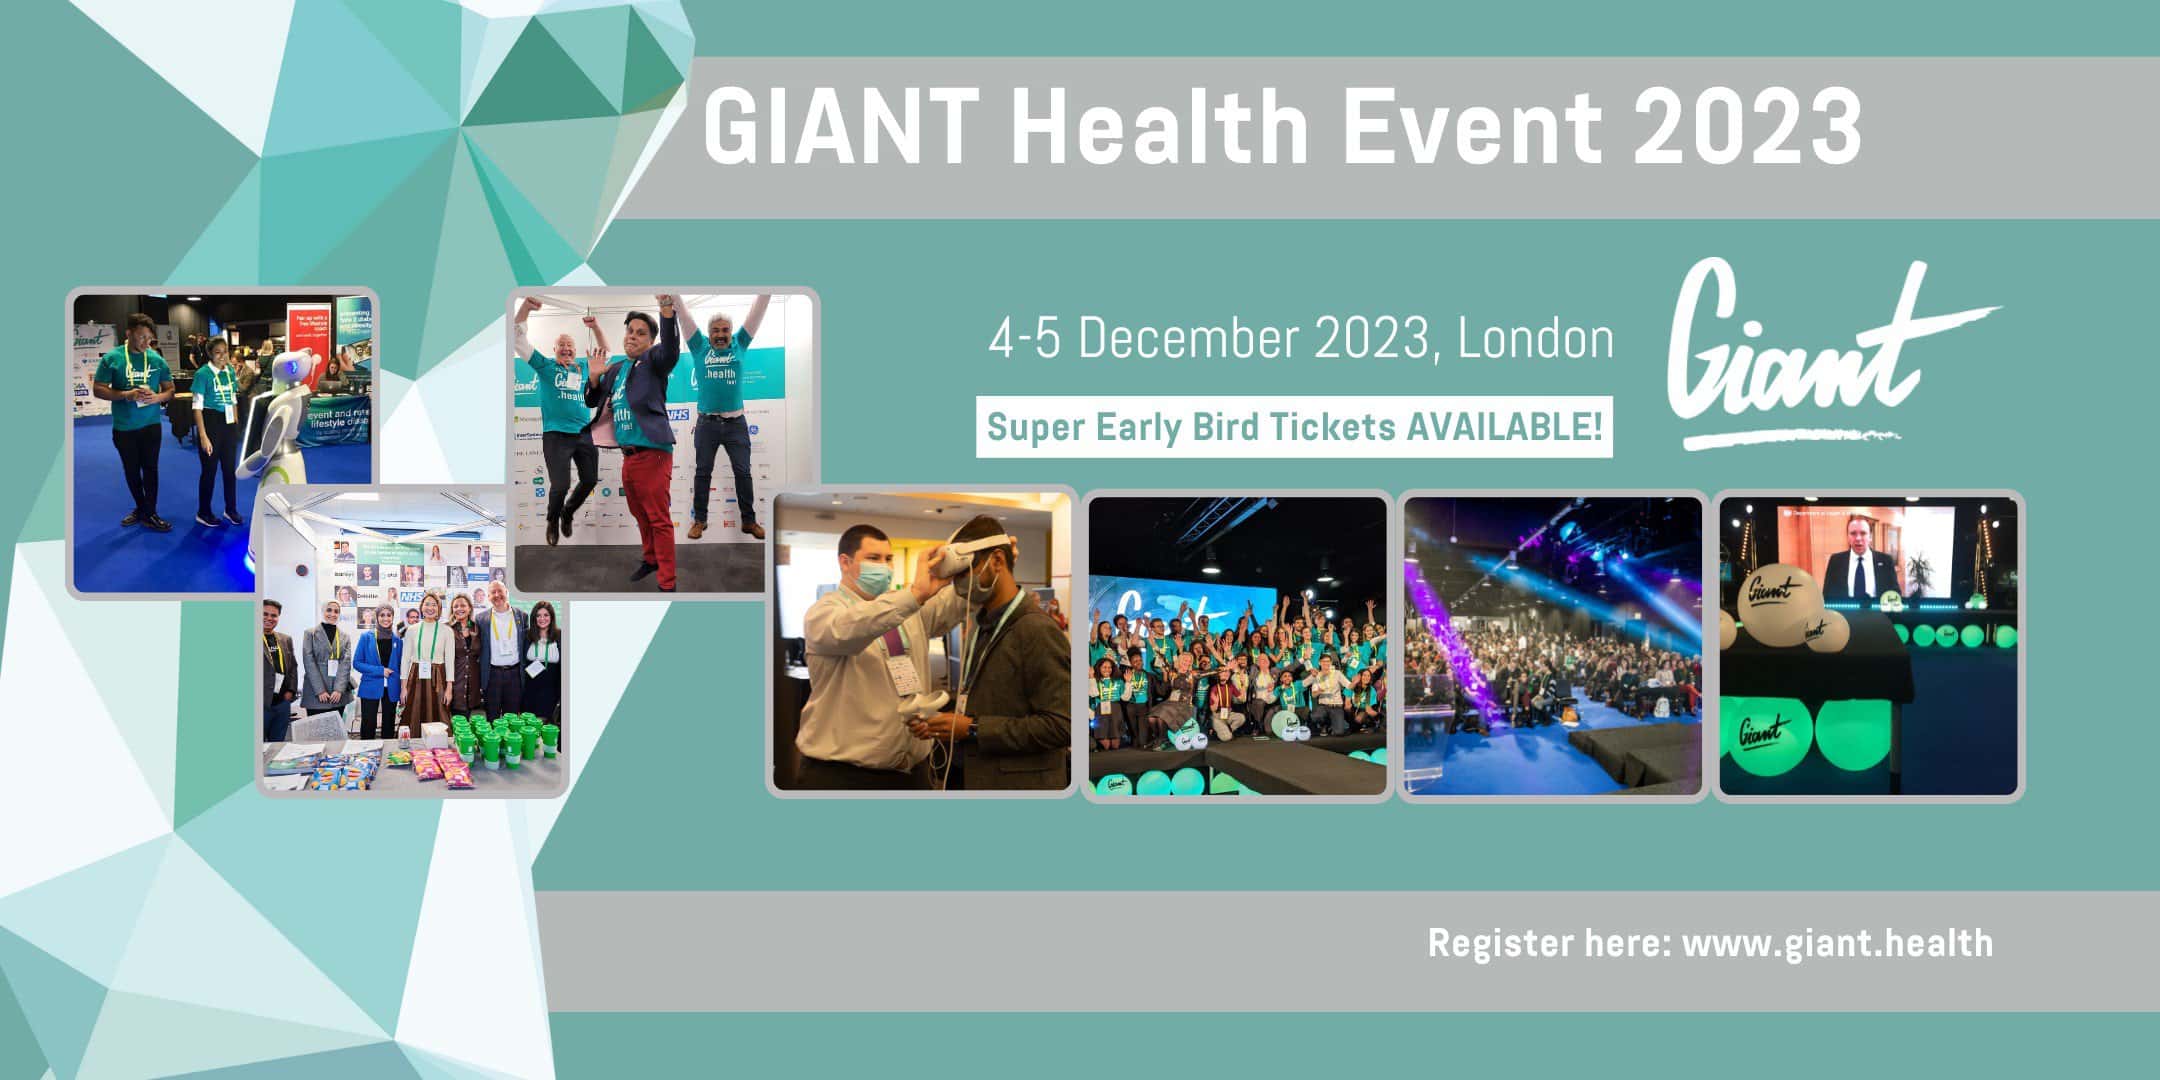 The GIANT Health Event, 2023